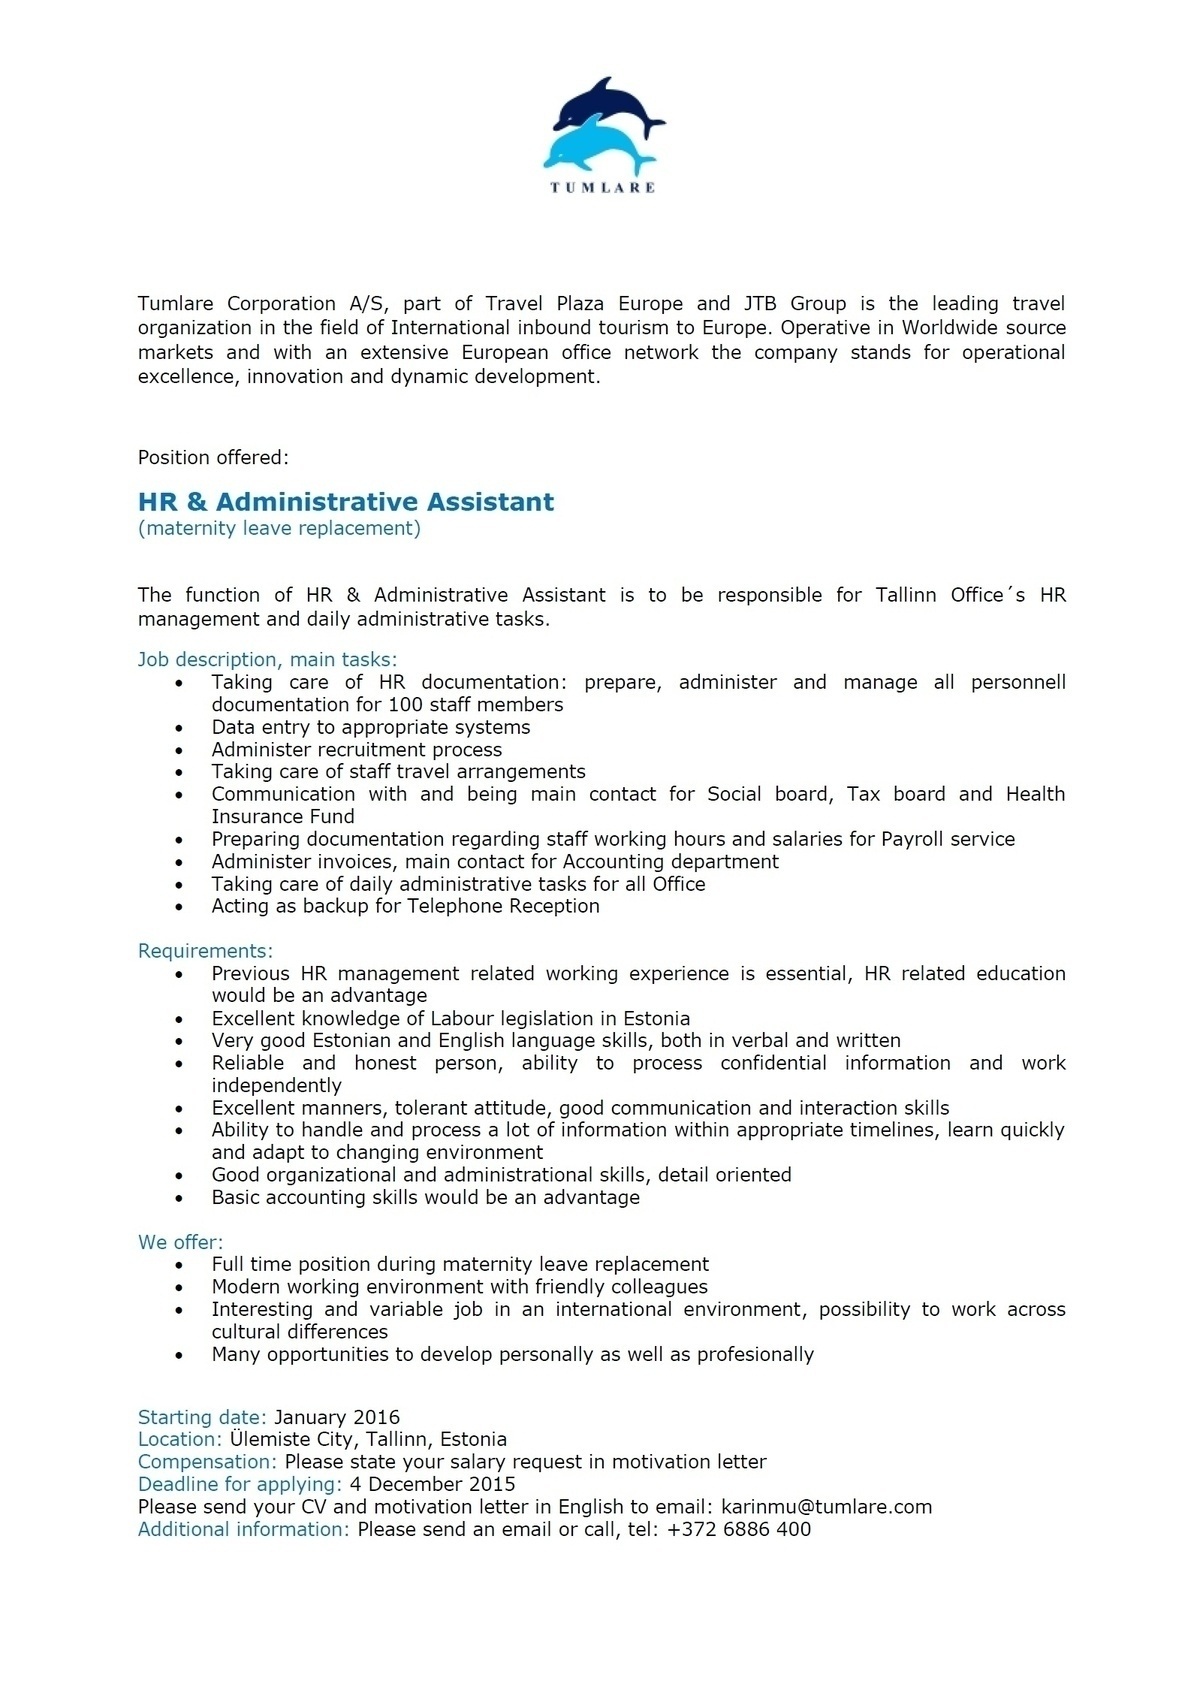 Tumlare Corporation AS HR & Administrative Assistant (maternity leave replacement)